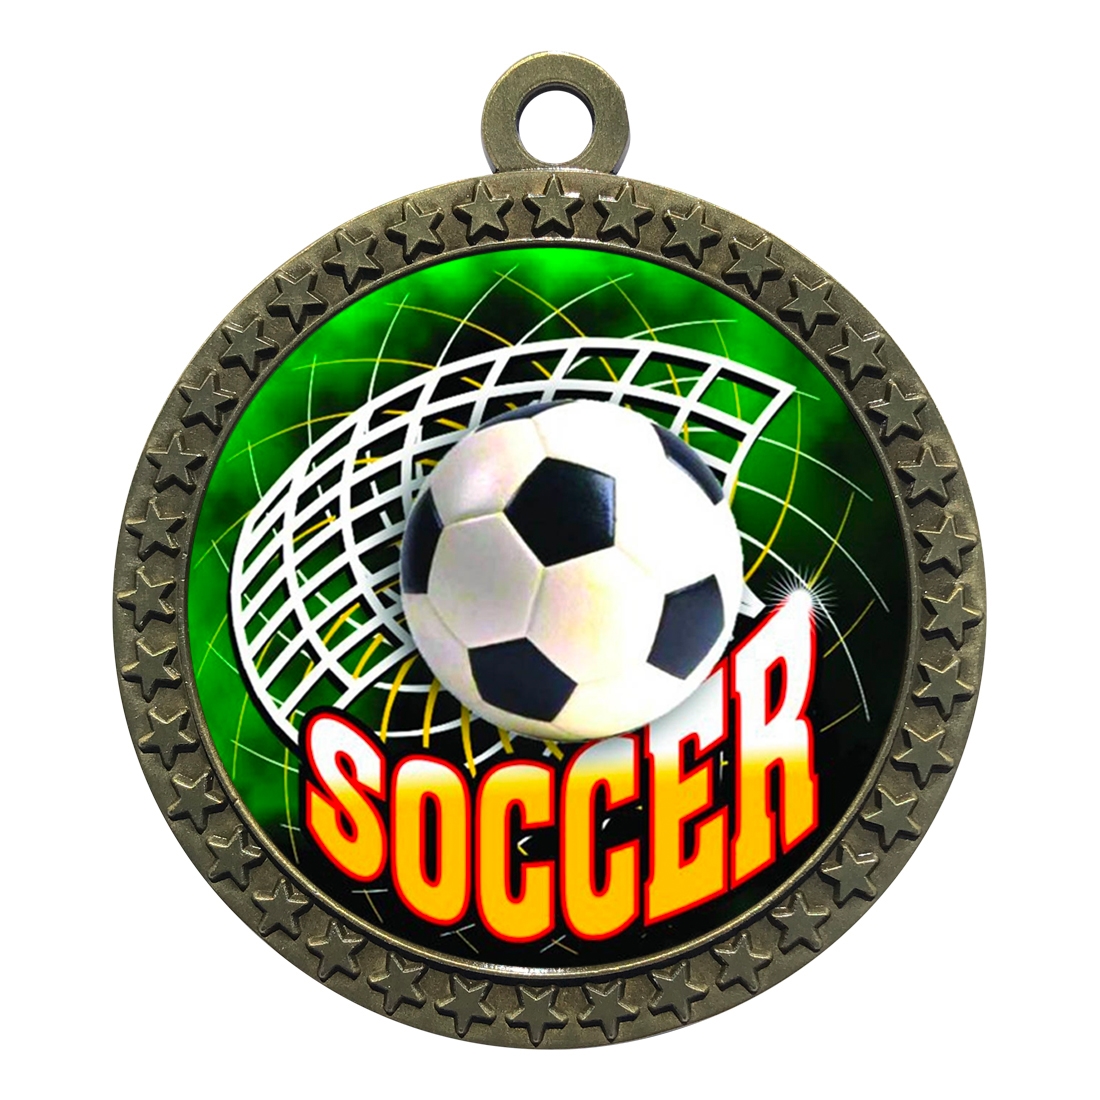 Express Medals 1 to 50 Packs 3 Soccer Cleat 2nd Place Silver Medal with Neck Ribbon Award XMD 